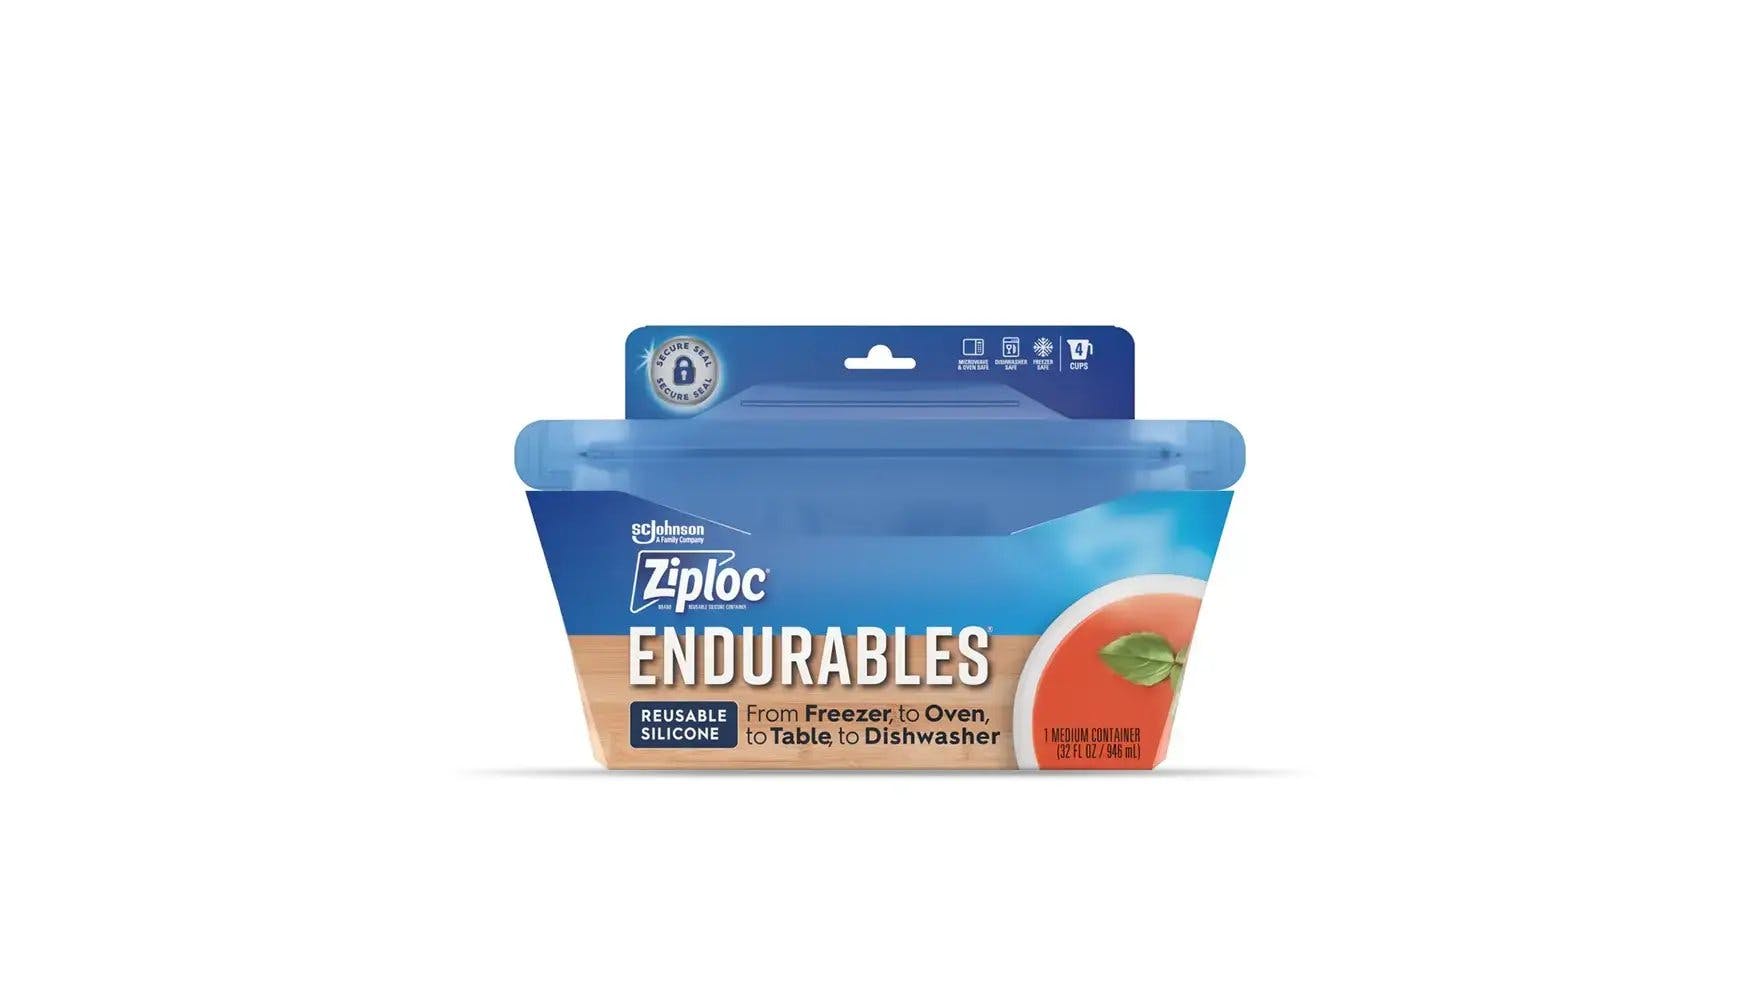  Ziploc Endurables Small, Medium, and Large Pouch, Reusable  Silicone Bags and Food Storage Meal Prep Containers for Freezer, Oven, and  Microwave, Dishwasher Safe : Health & Household